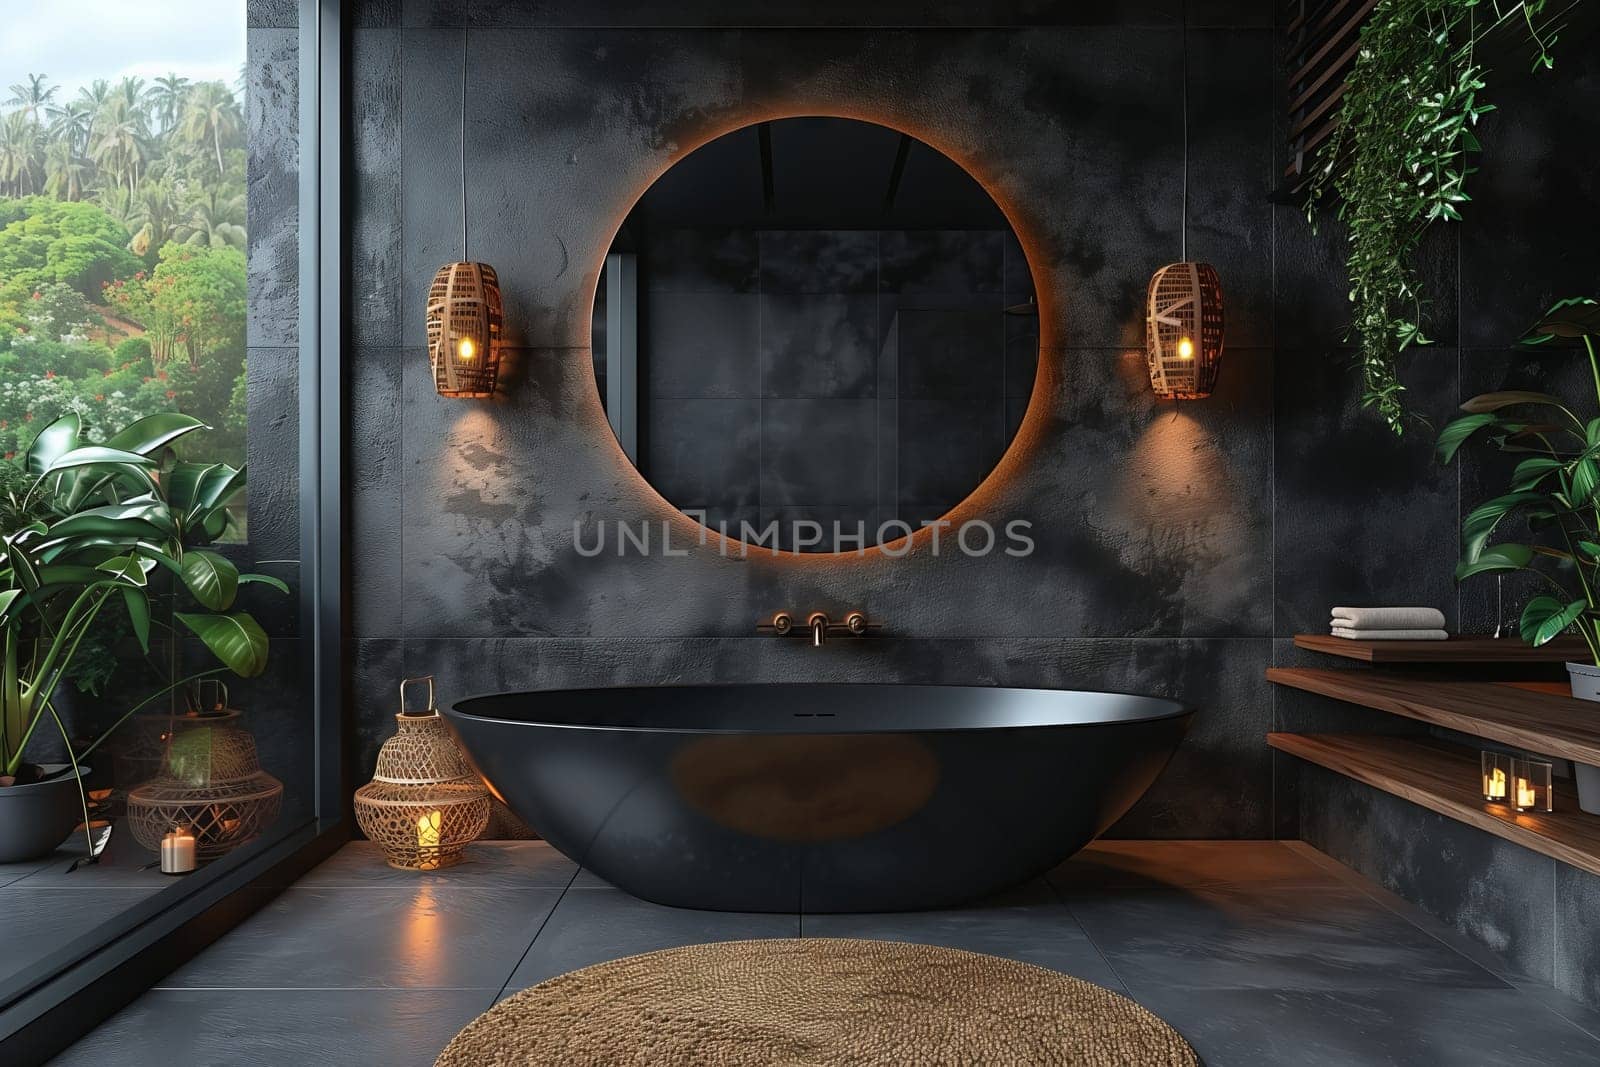 An interior design with a black tub and round mirror in a bathroom. The room features hardwood floors and a plant for a touch of nature in the building